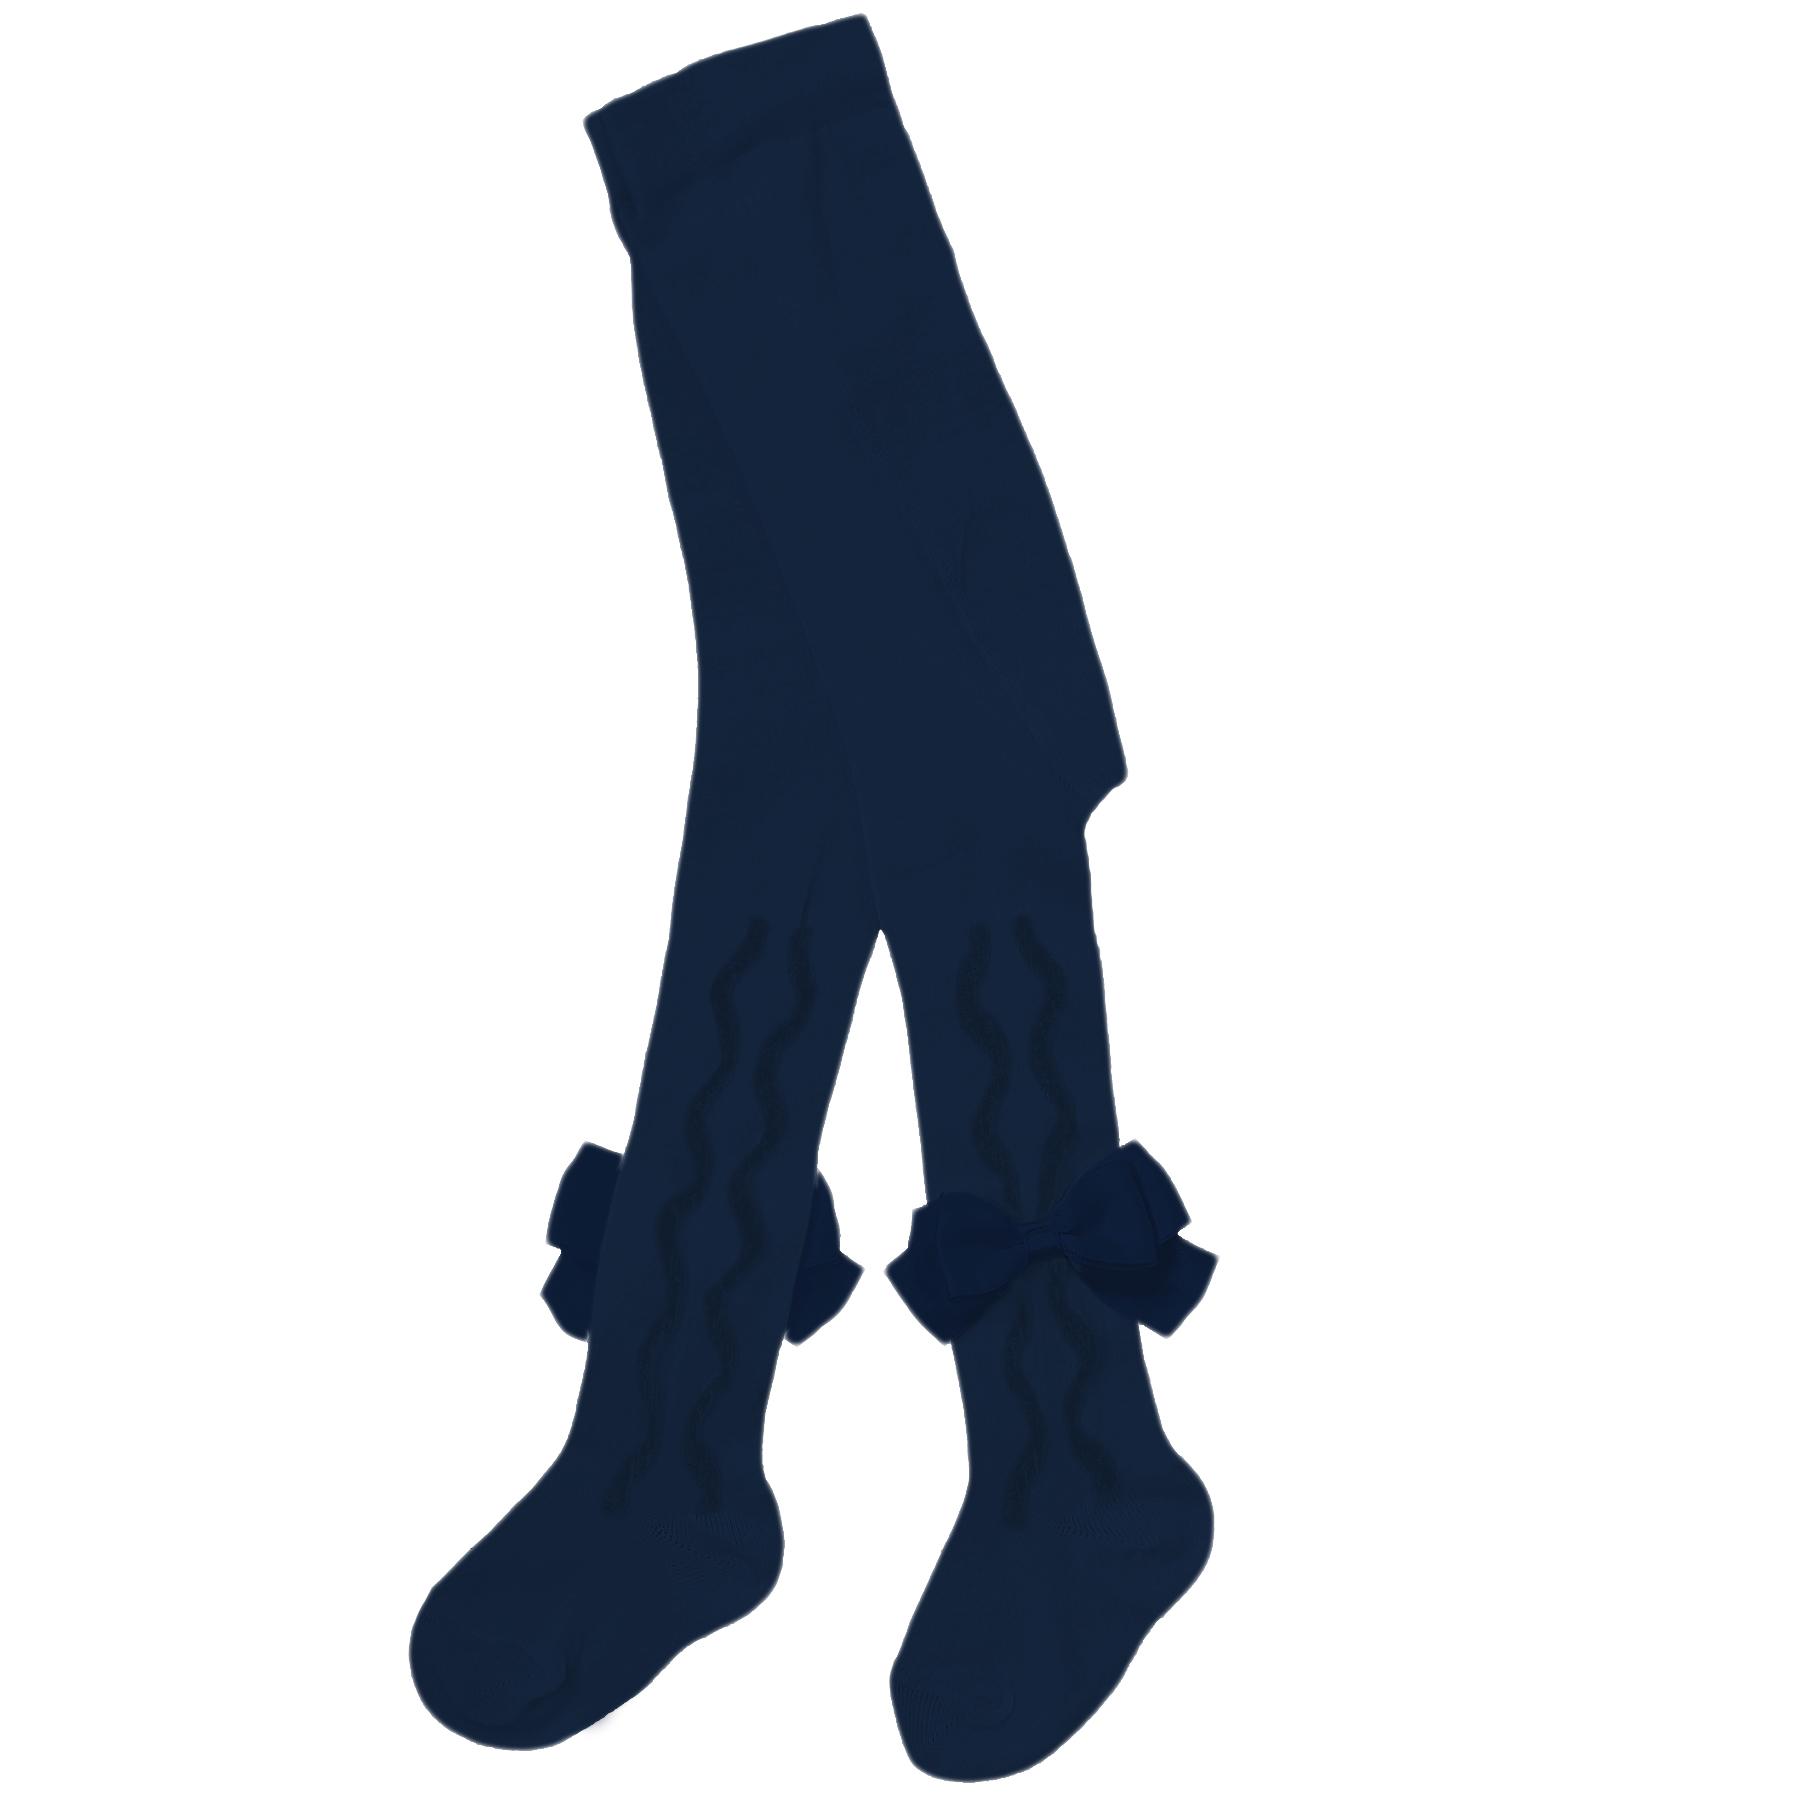 Pex Kids Grazia Tights with Side Ruffles & Bows In Navy